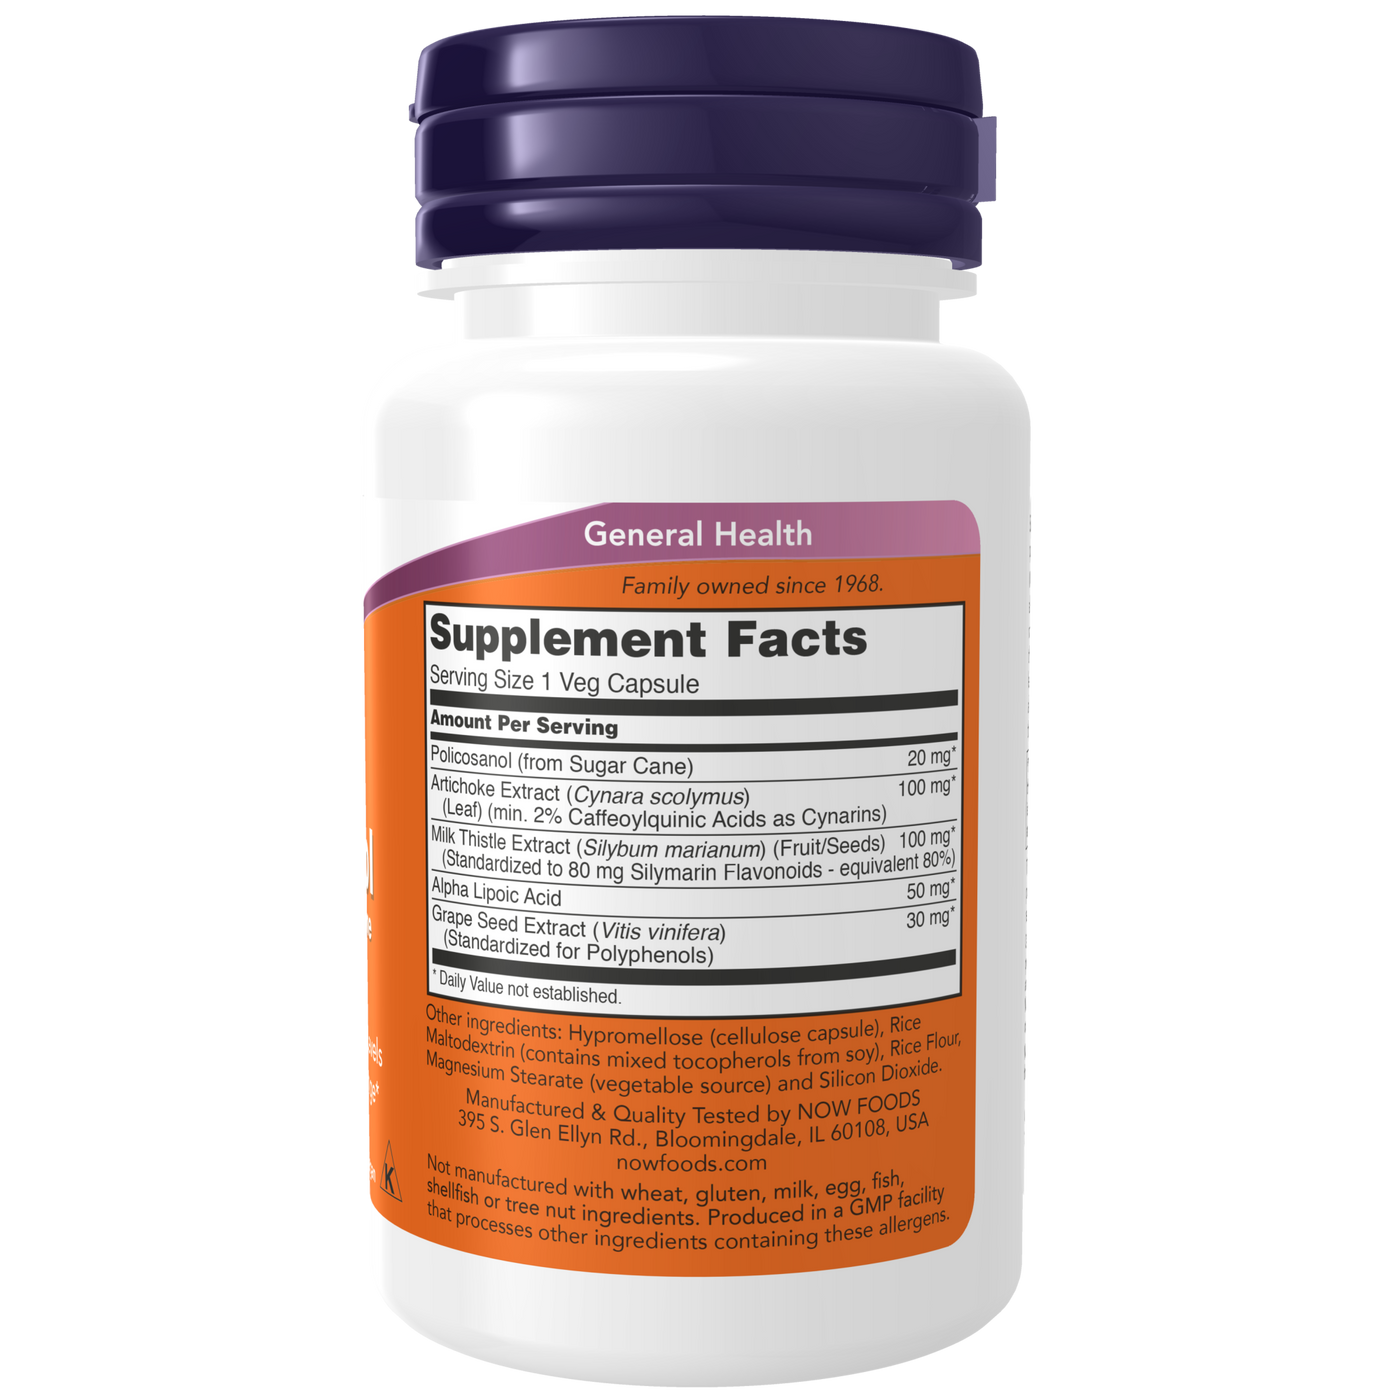 Double Strength Policosanol  Curated Wellness